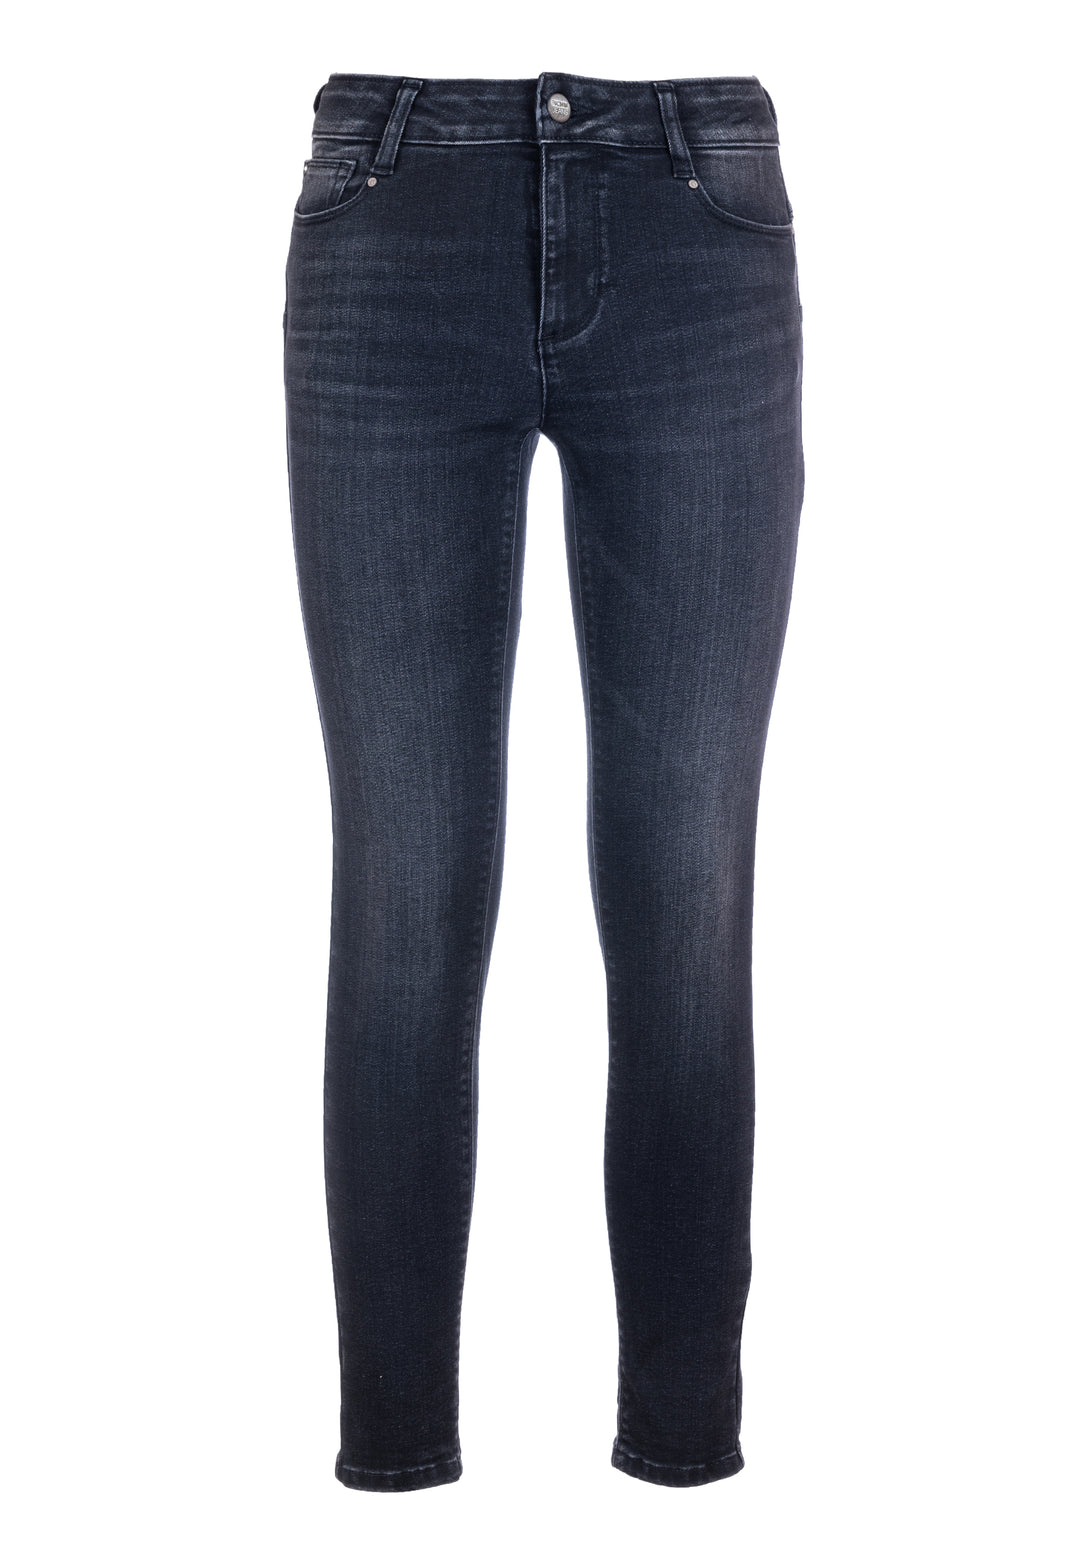 Jeans skinny fit with push up effect made in black denim with dark wash